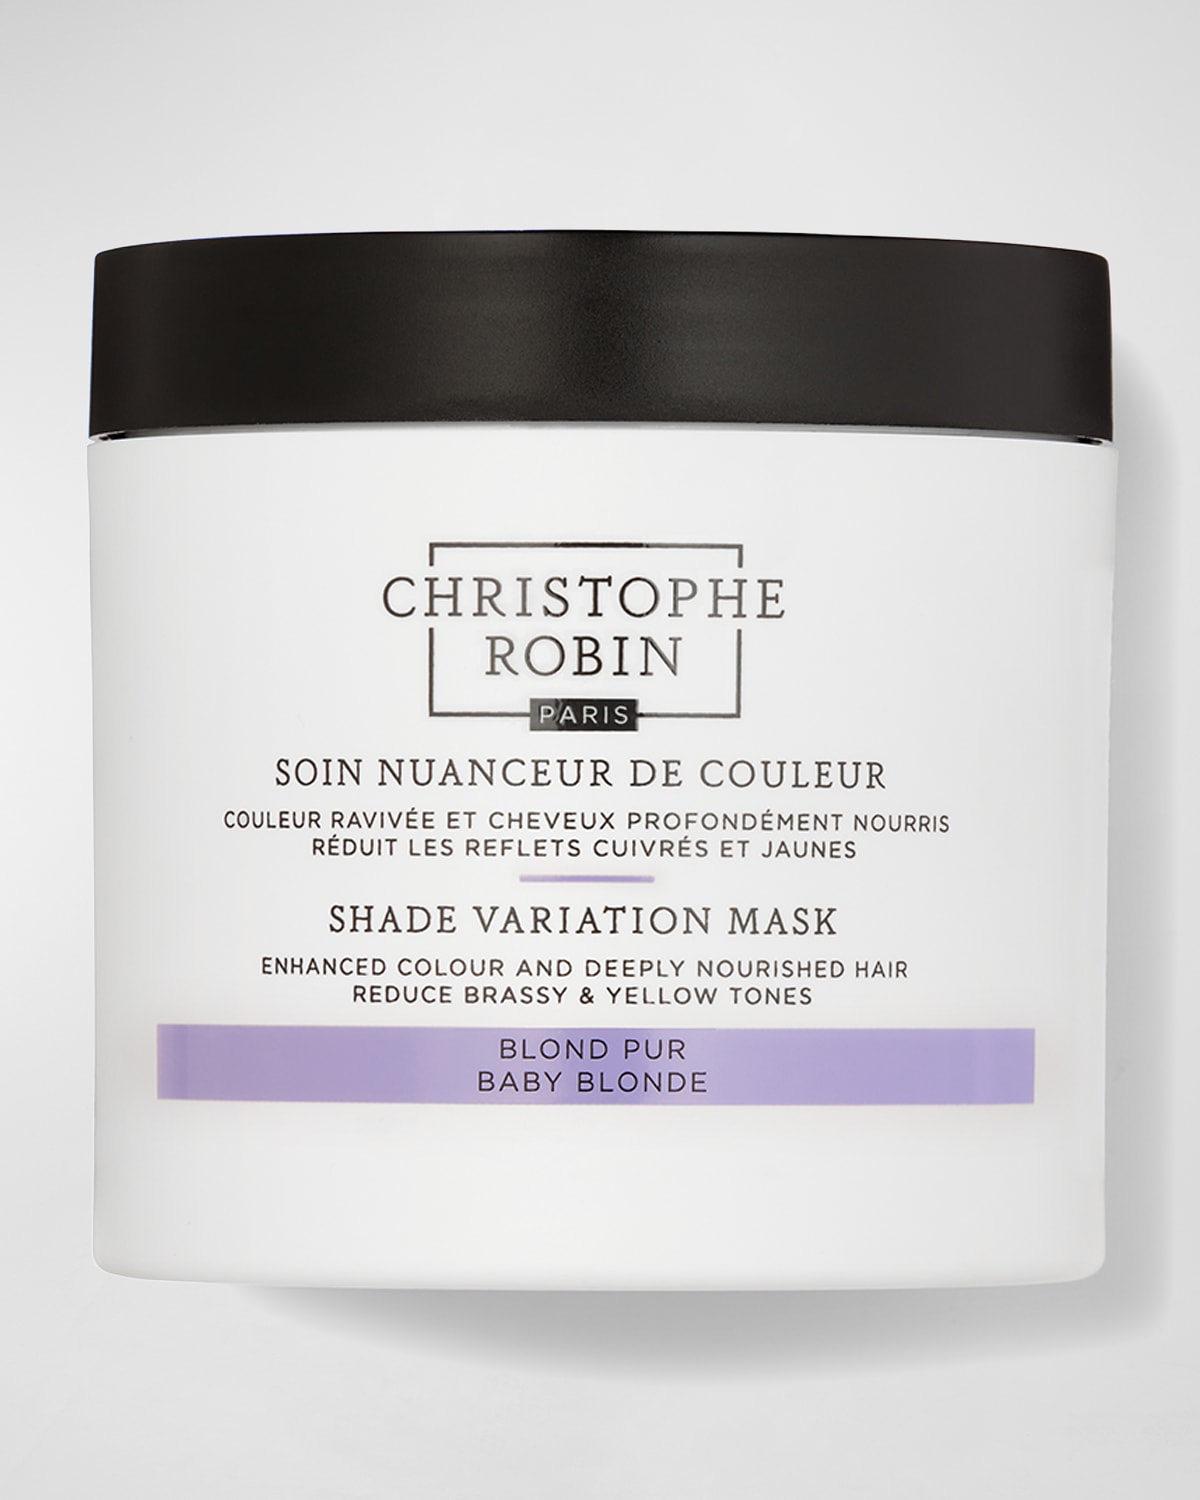 Christophe Robin Shade Variation Care Nutritive Mask with Temporary Coloring &#150; Baby Blond, 8.4 oz./ 250 mL